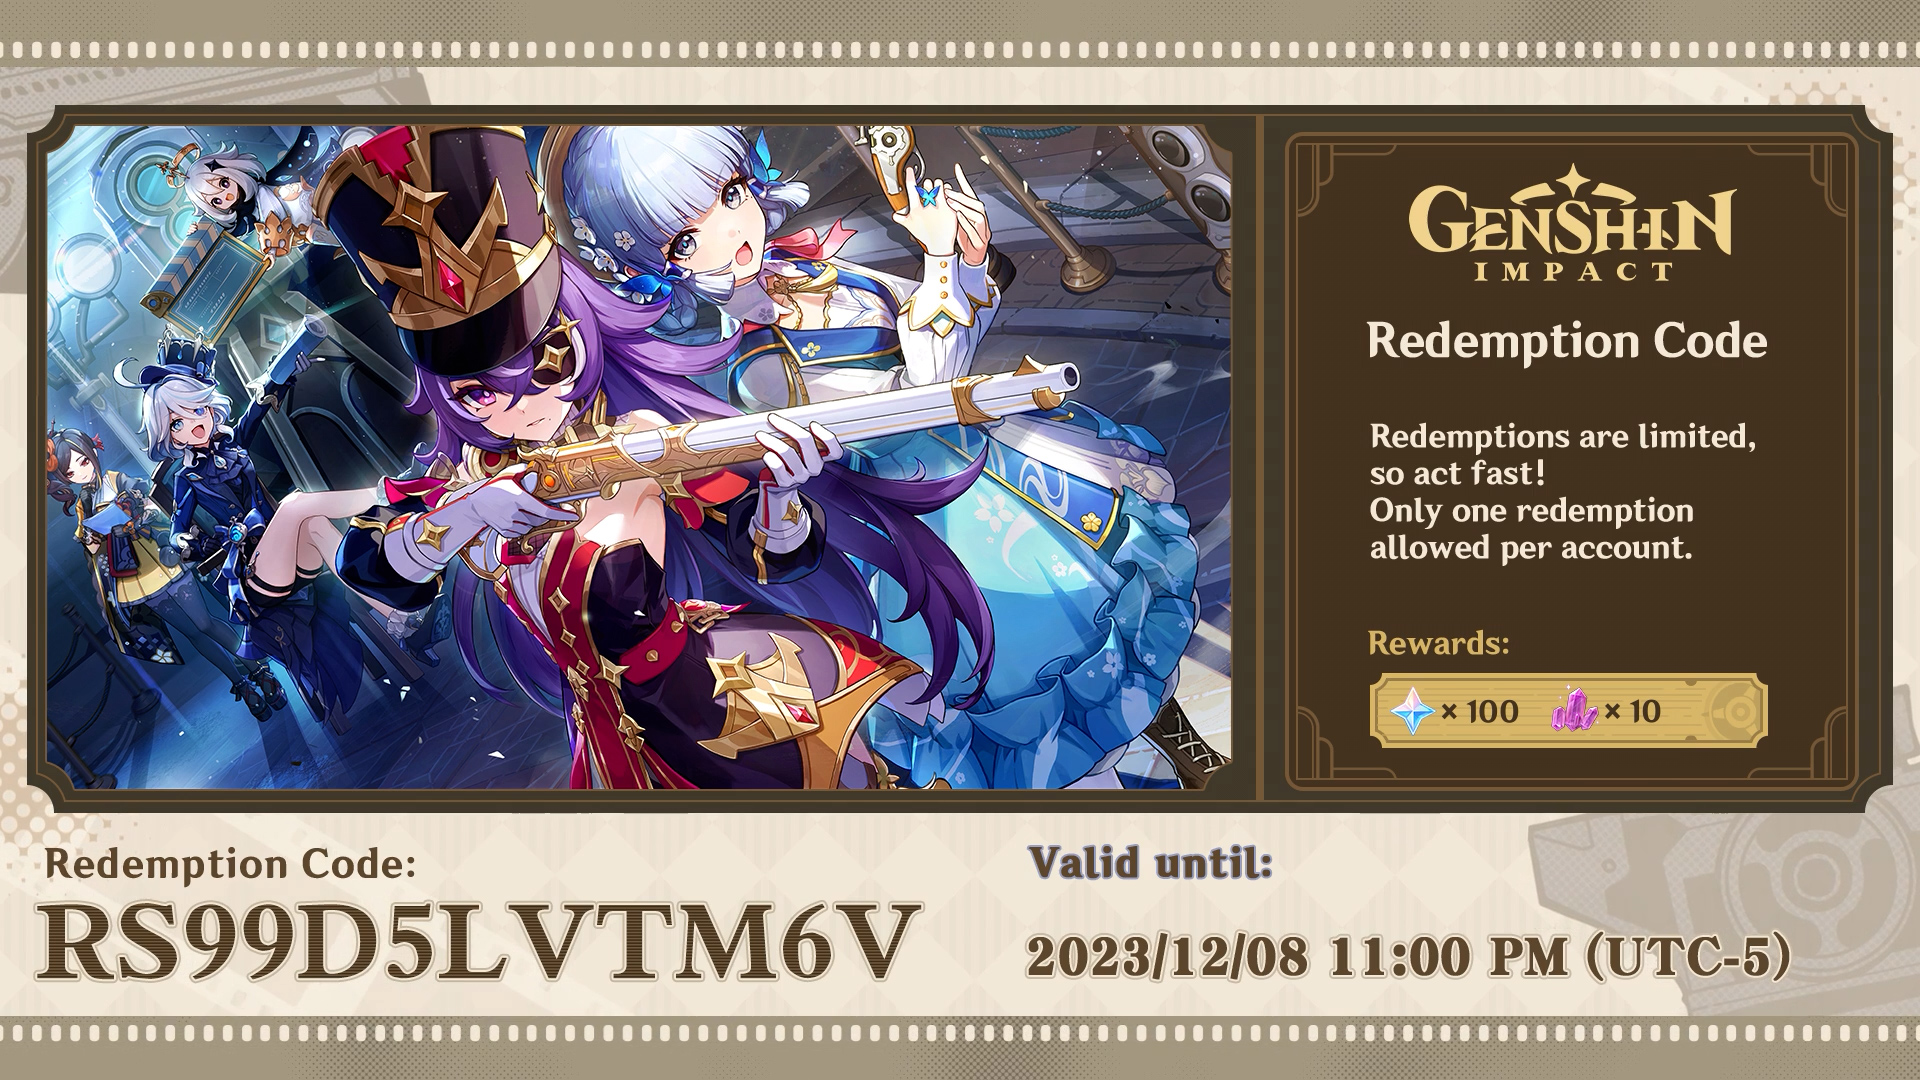 Genshin Impact on X: Special Program Redemption Codes #GenshinImpact  Travelers, here are the redemption codes for this Special Program!  Primogems ×100 + Mystic Enhancement Ore ×10 RS99D5LVTM6V Primogems ×100 +  Hero's Wit ×